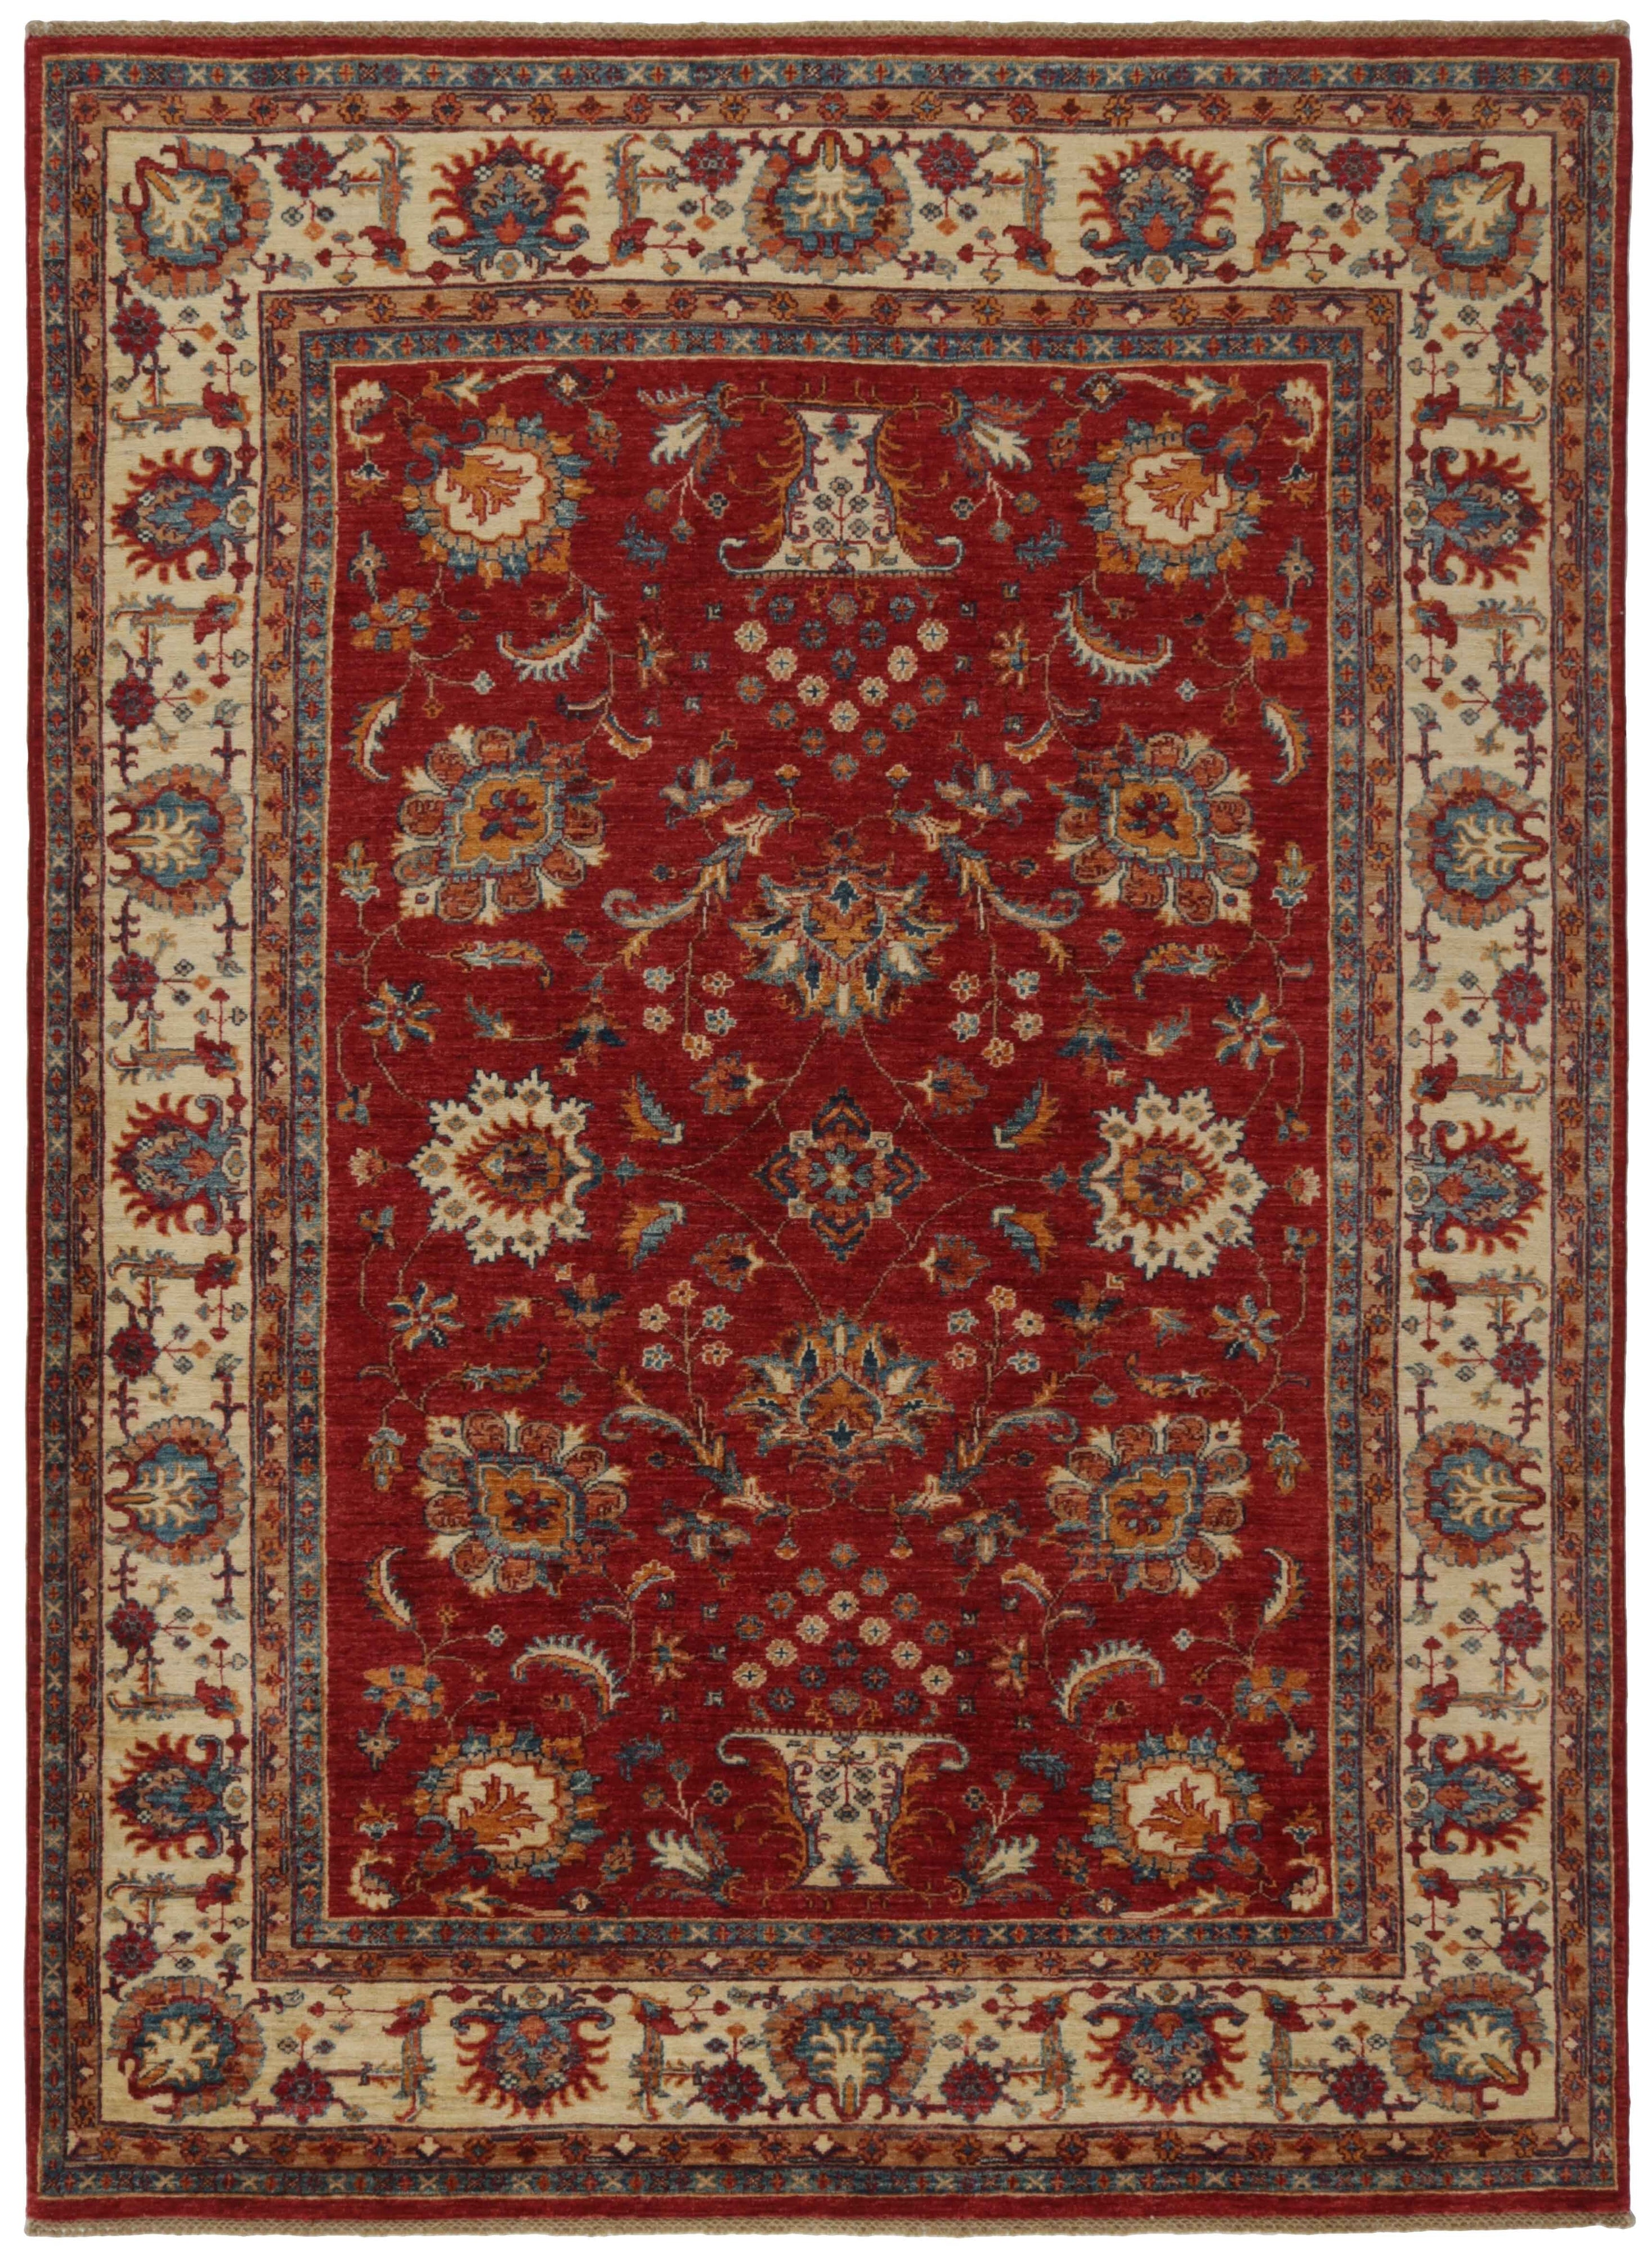 oriental rug with red and beige floral pattern